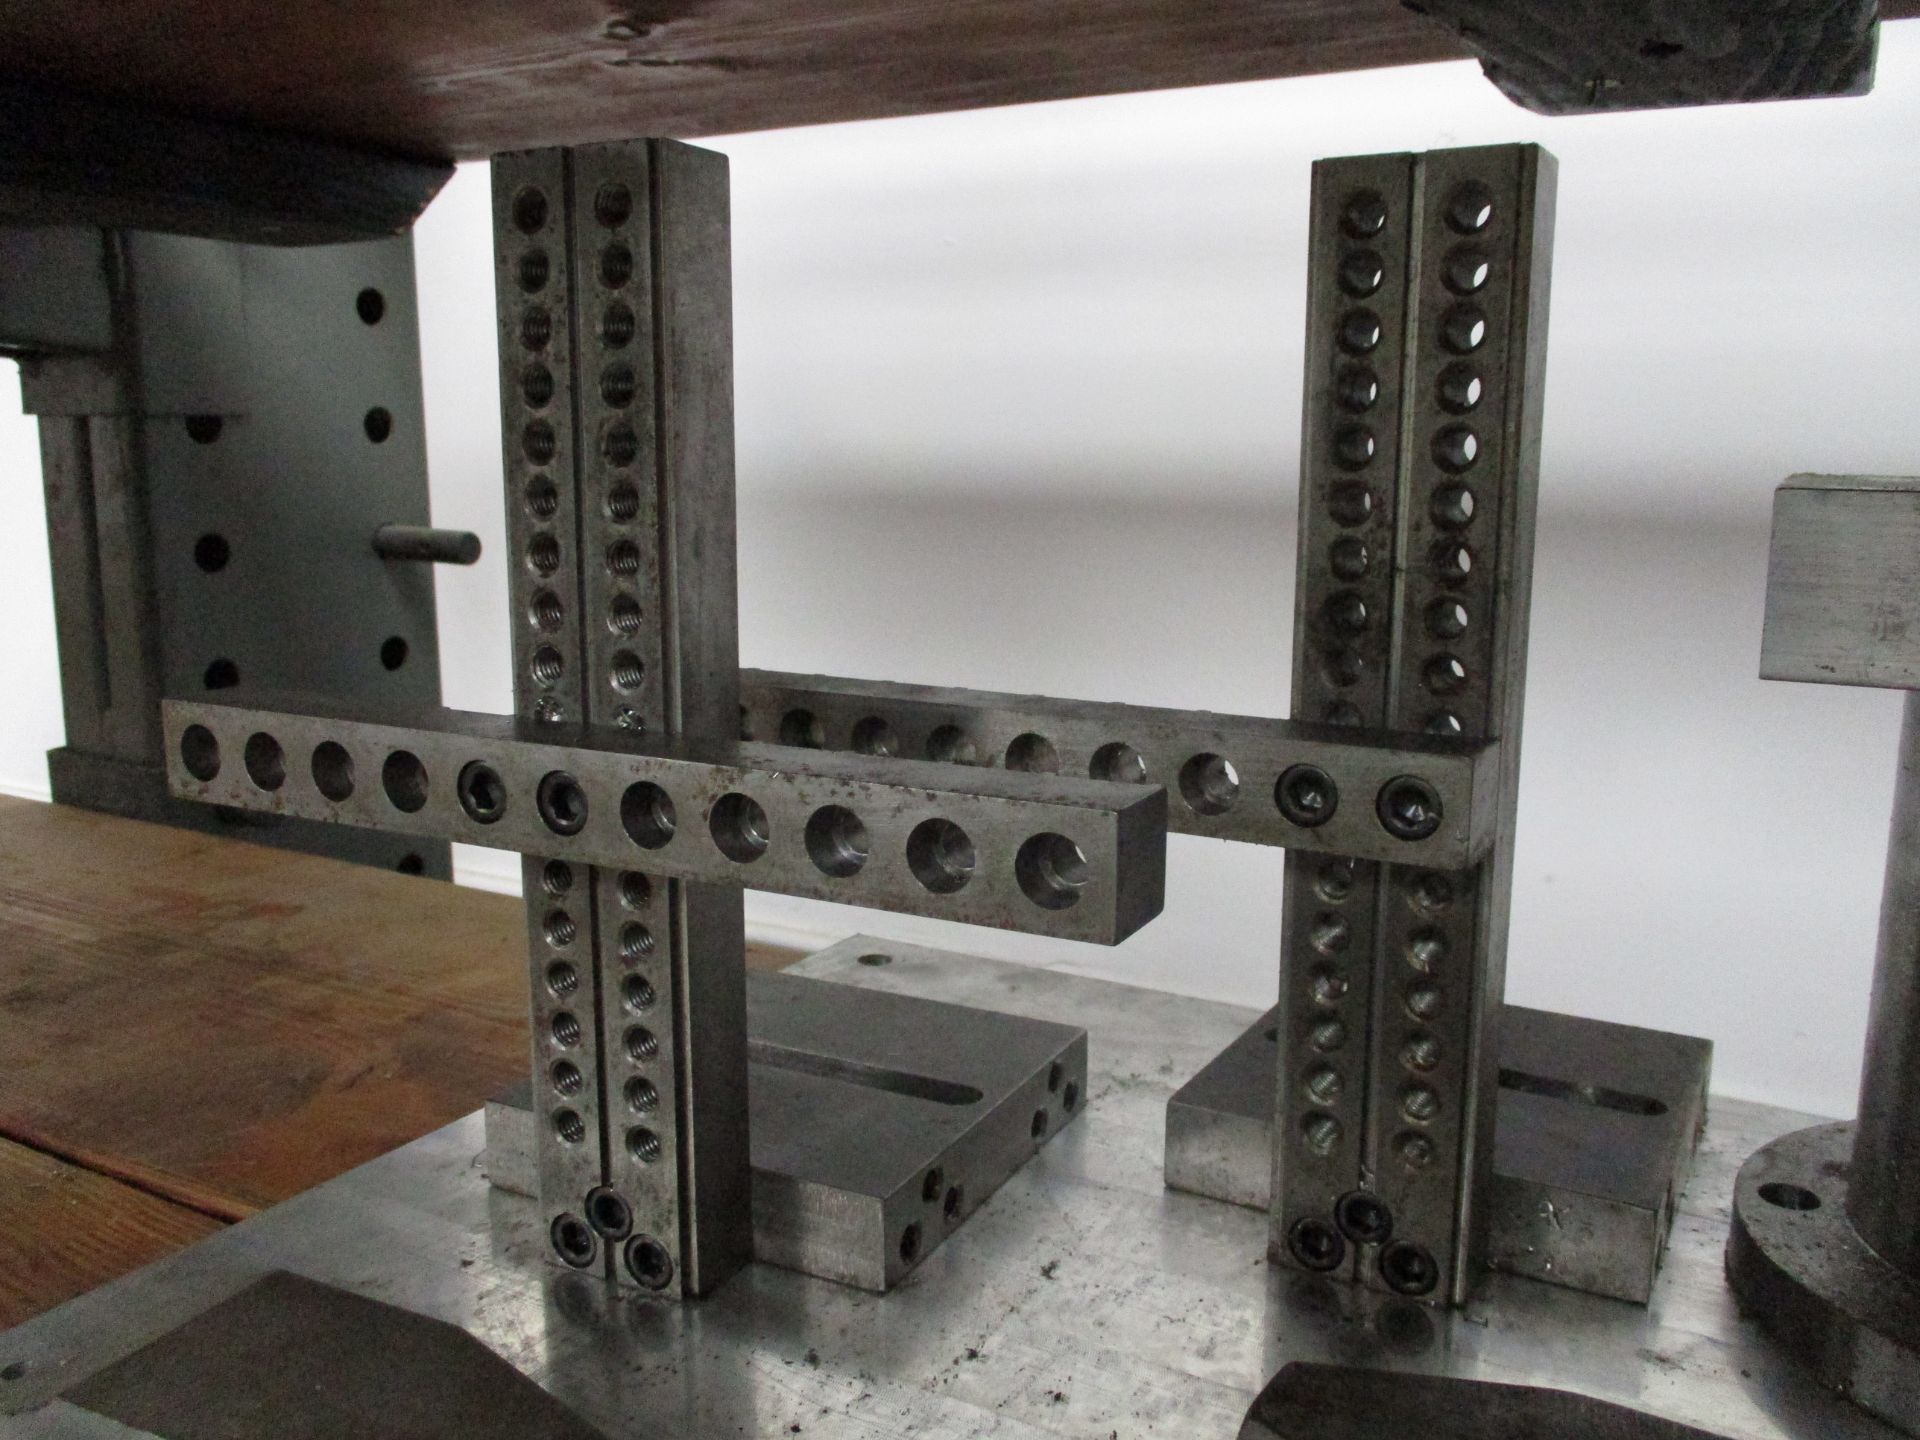 Miscellaneous Machining Fixtures and Aluminum Plate, 20" X 32" X 3/4"